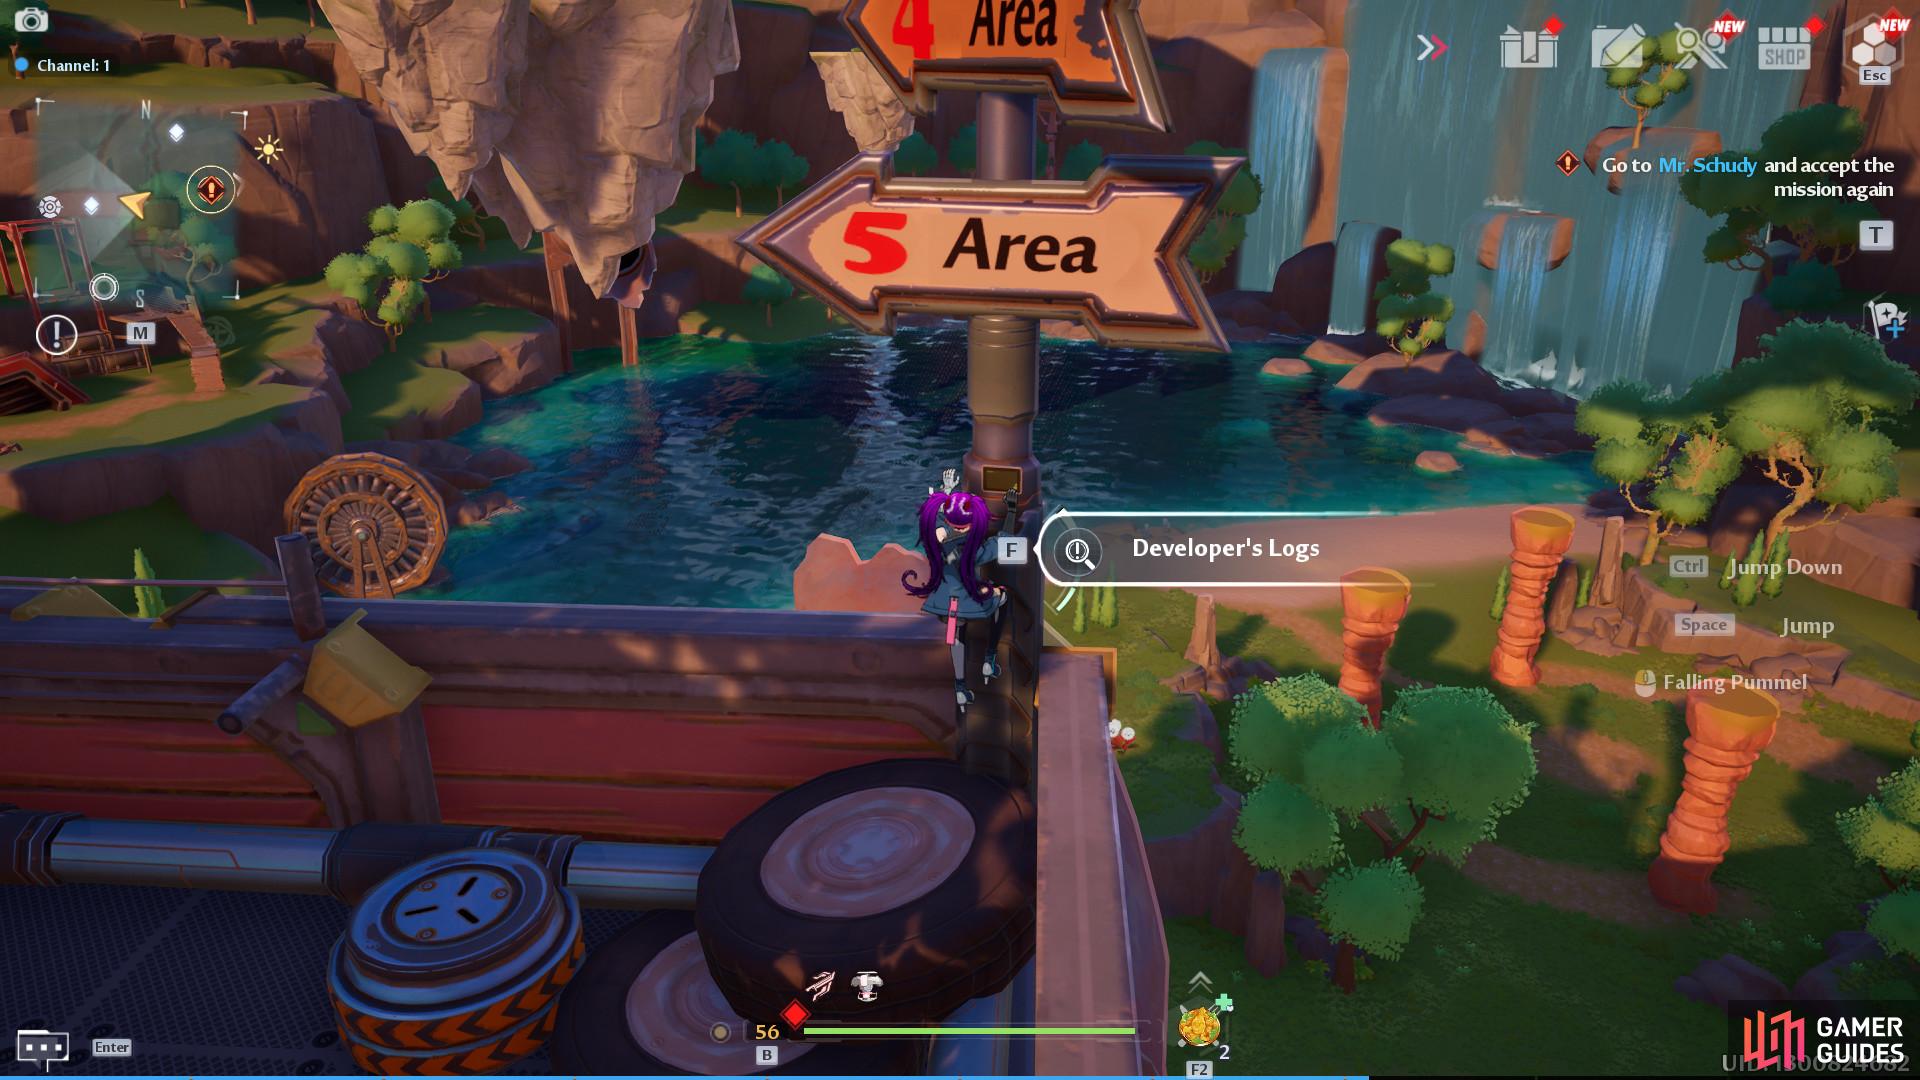 The third Dev Log location is on a signpost to the west of the main base.